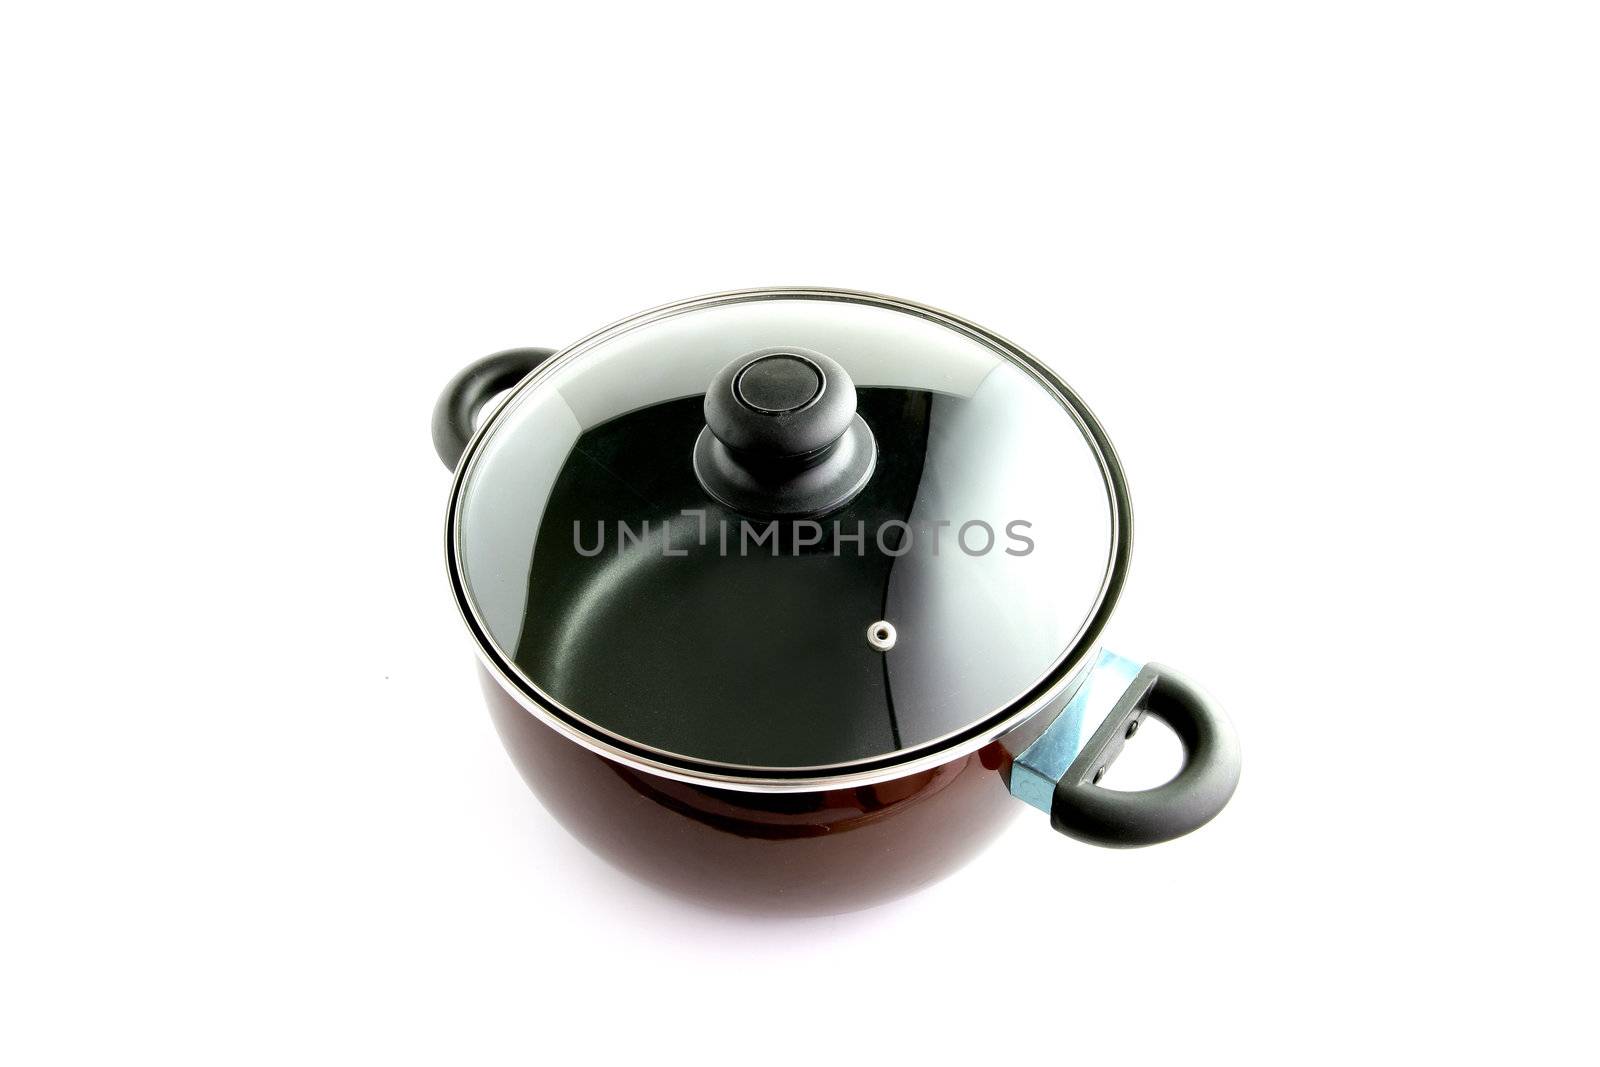 Large pan with glass lid by phovoir